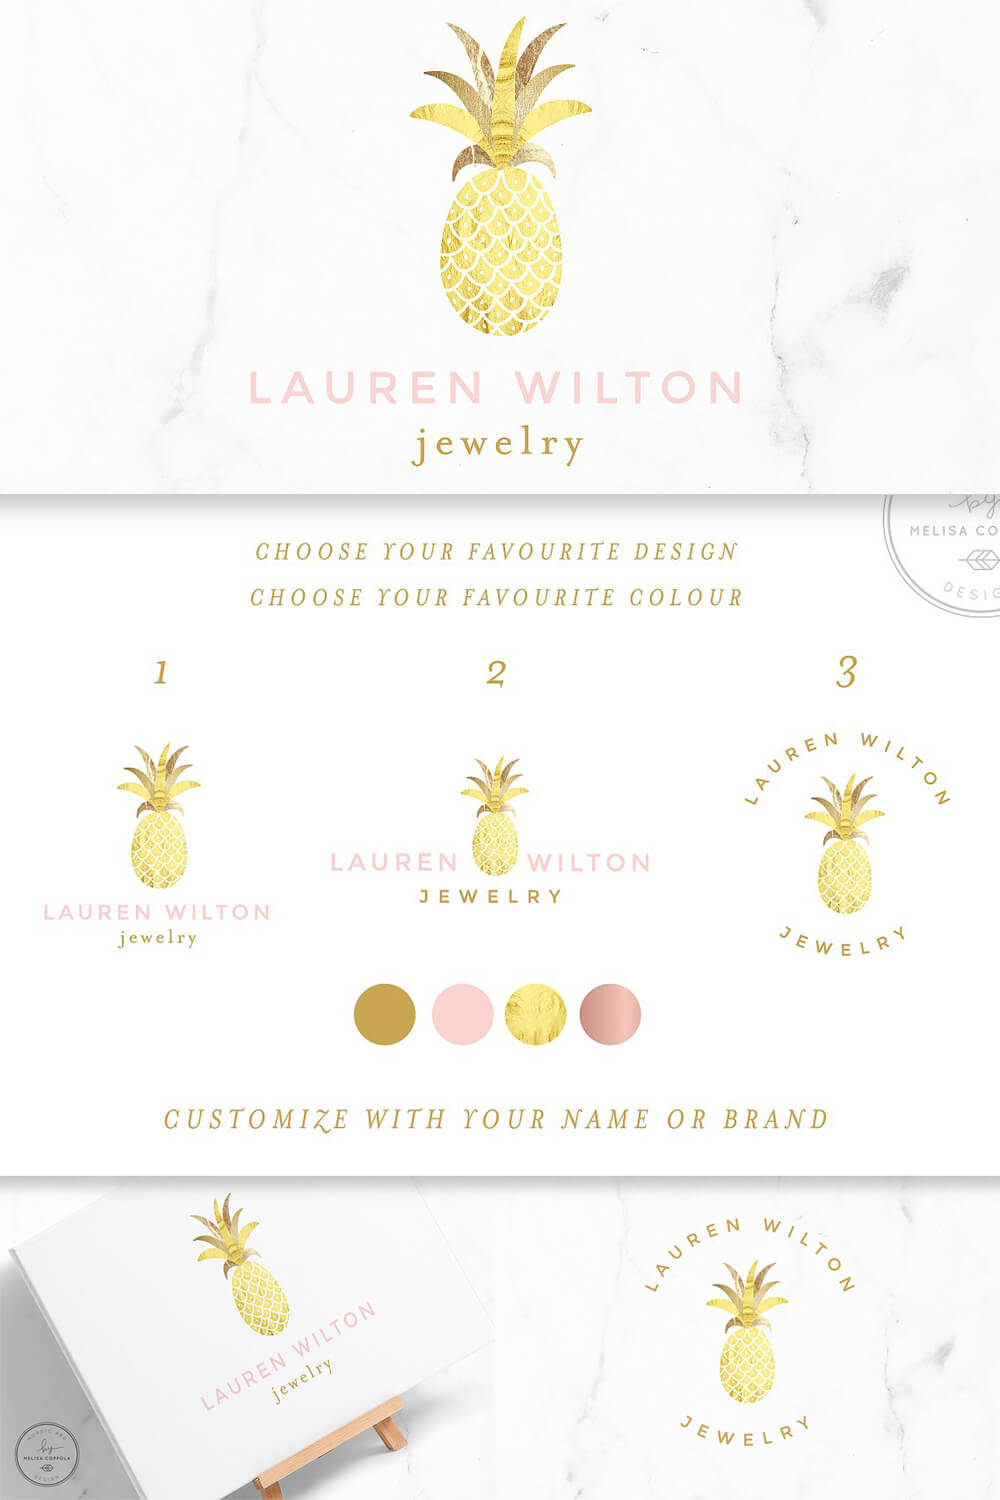 Luxury golden pineapple logo on top of the picture, design choice proposal.